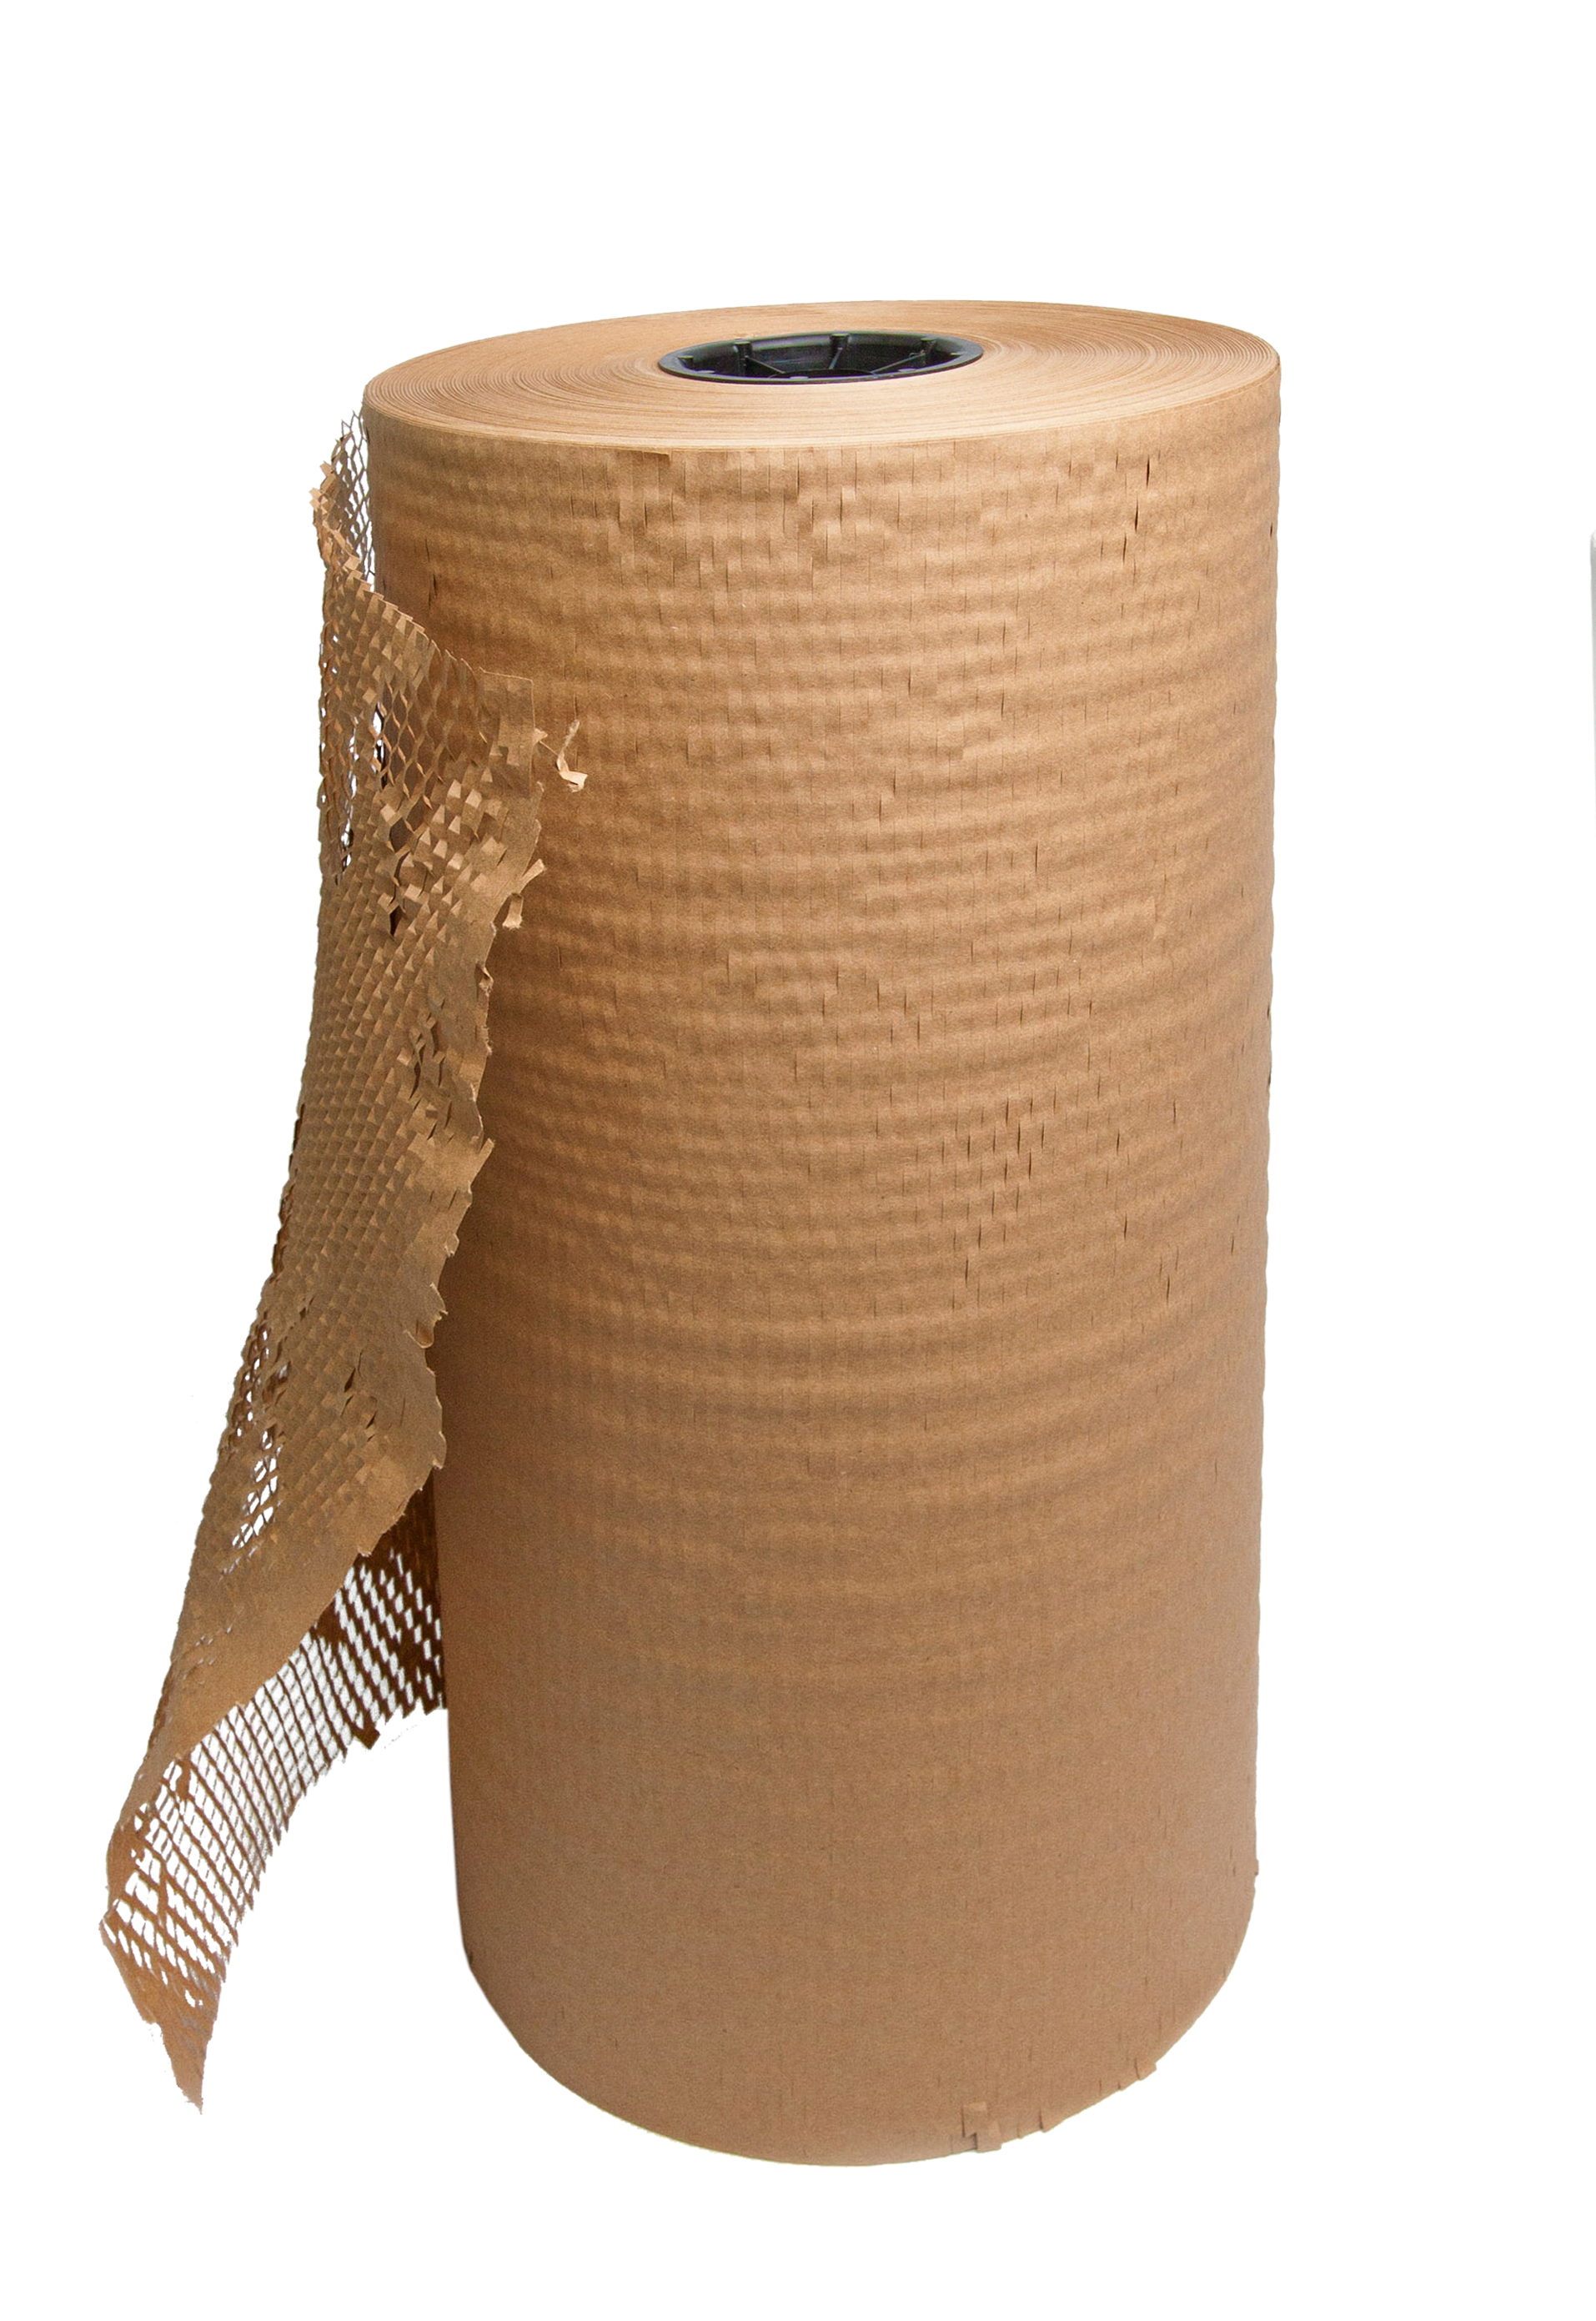 where can i buy a roll of brown paper